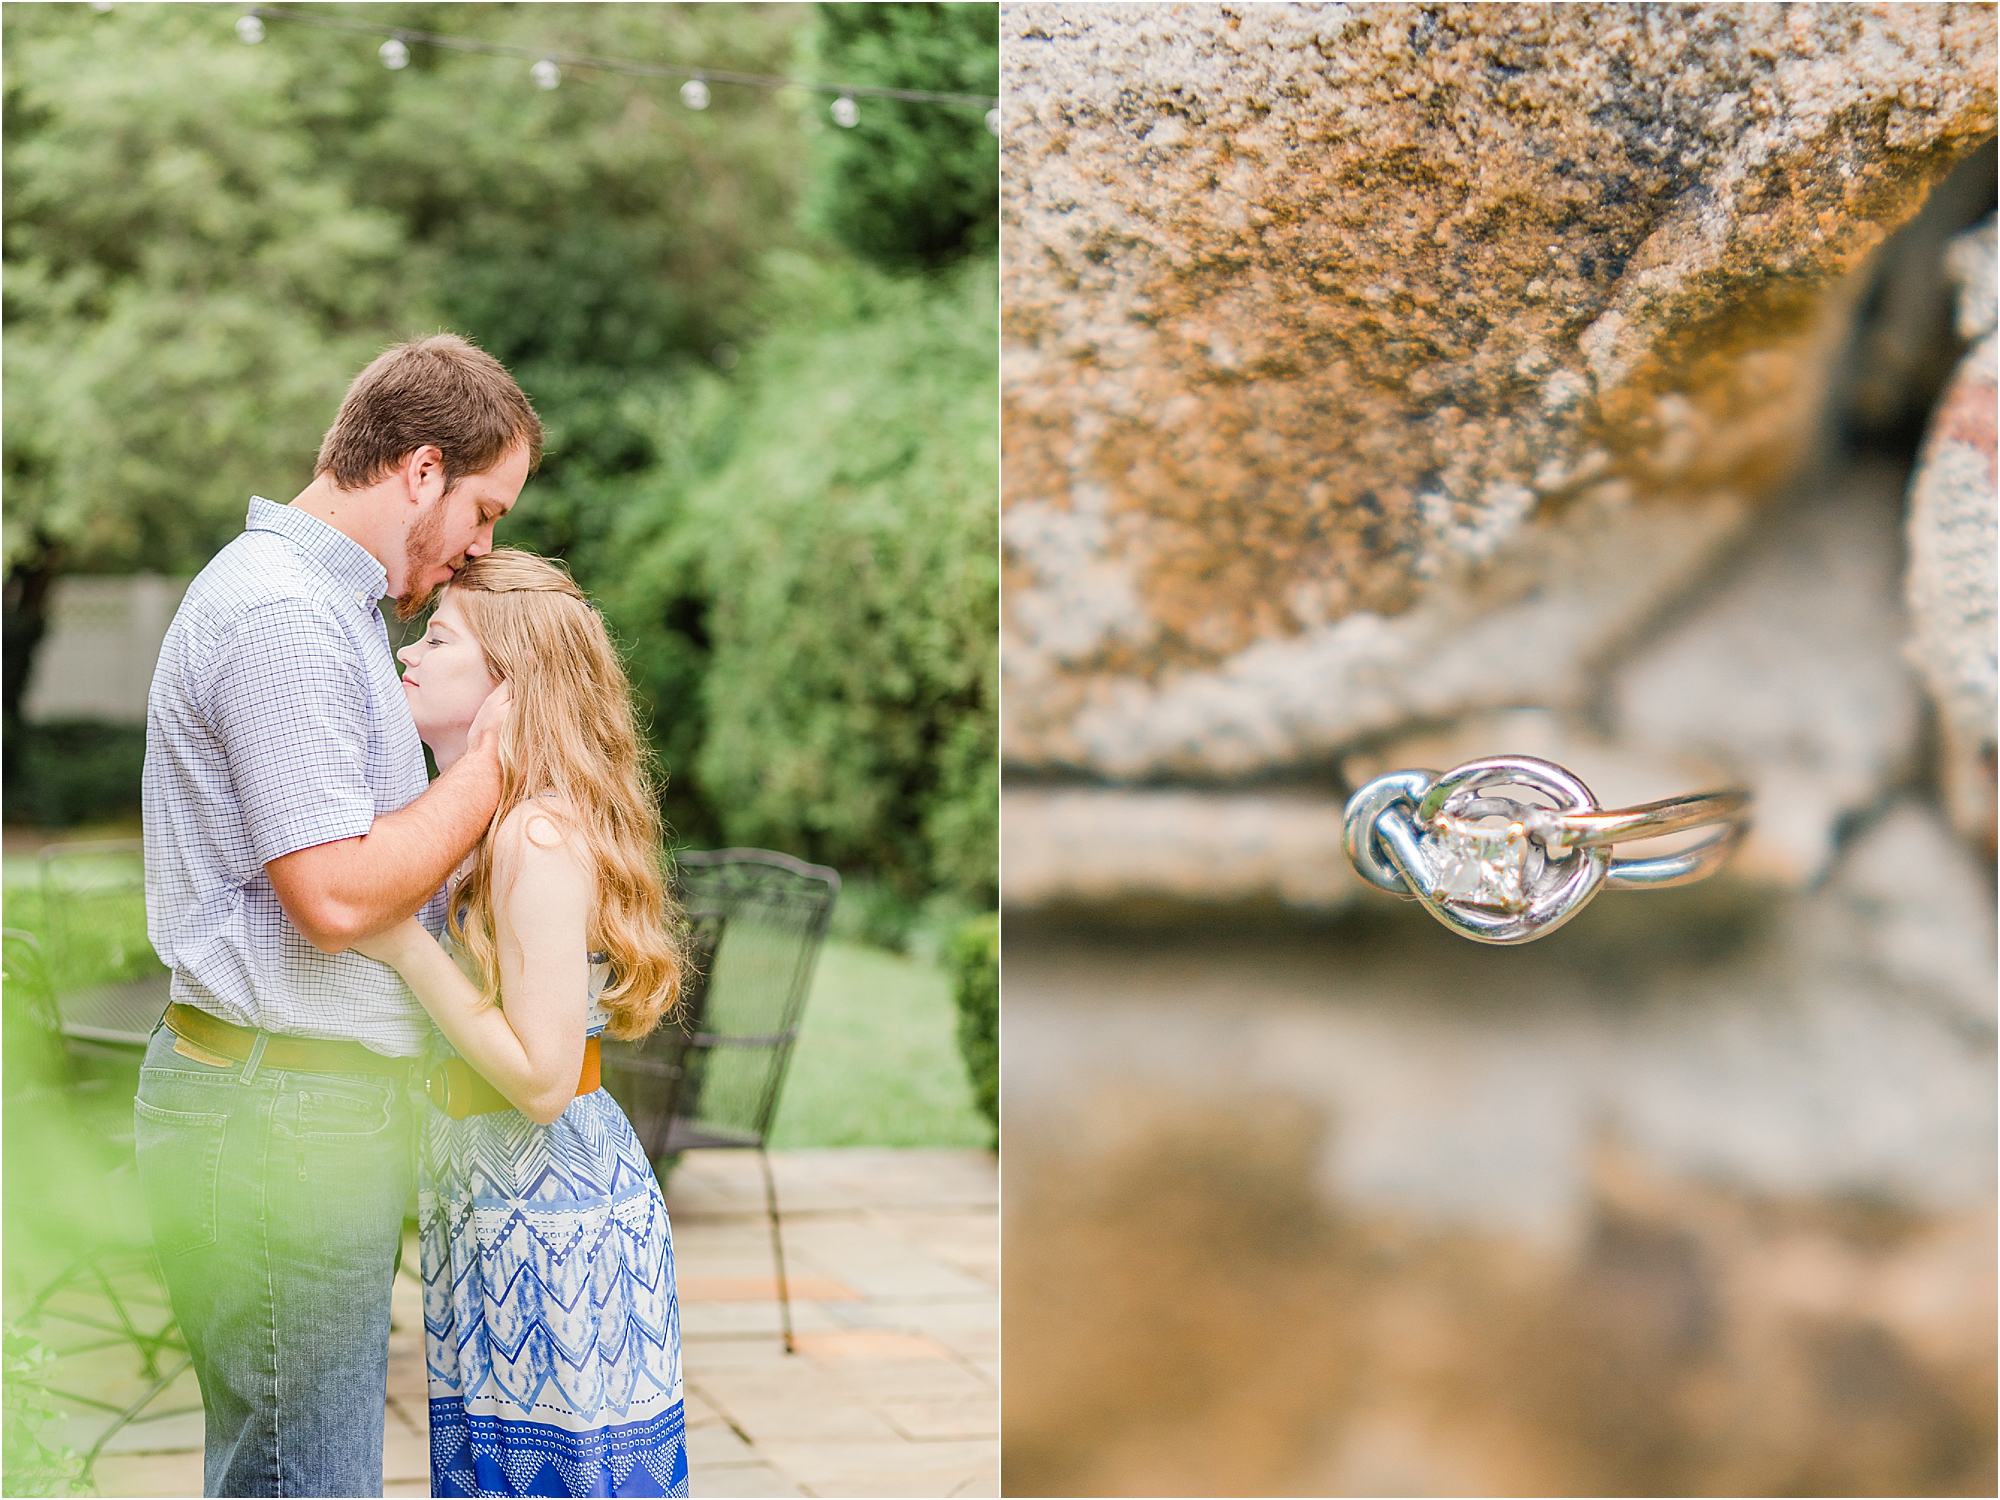 Engagement session at The Maridor in Roanoke, Virginia.